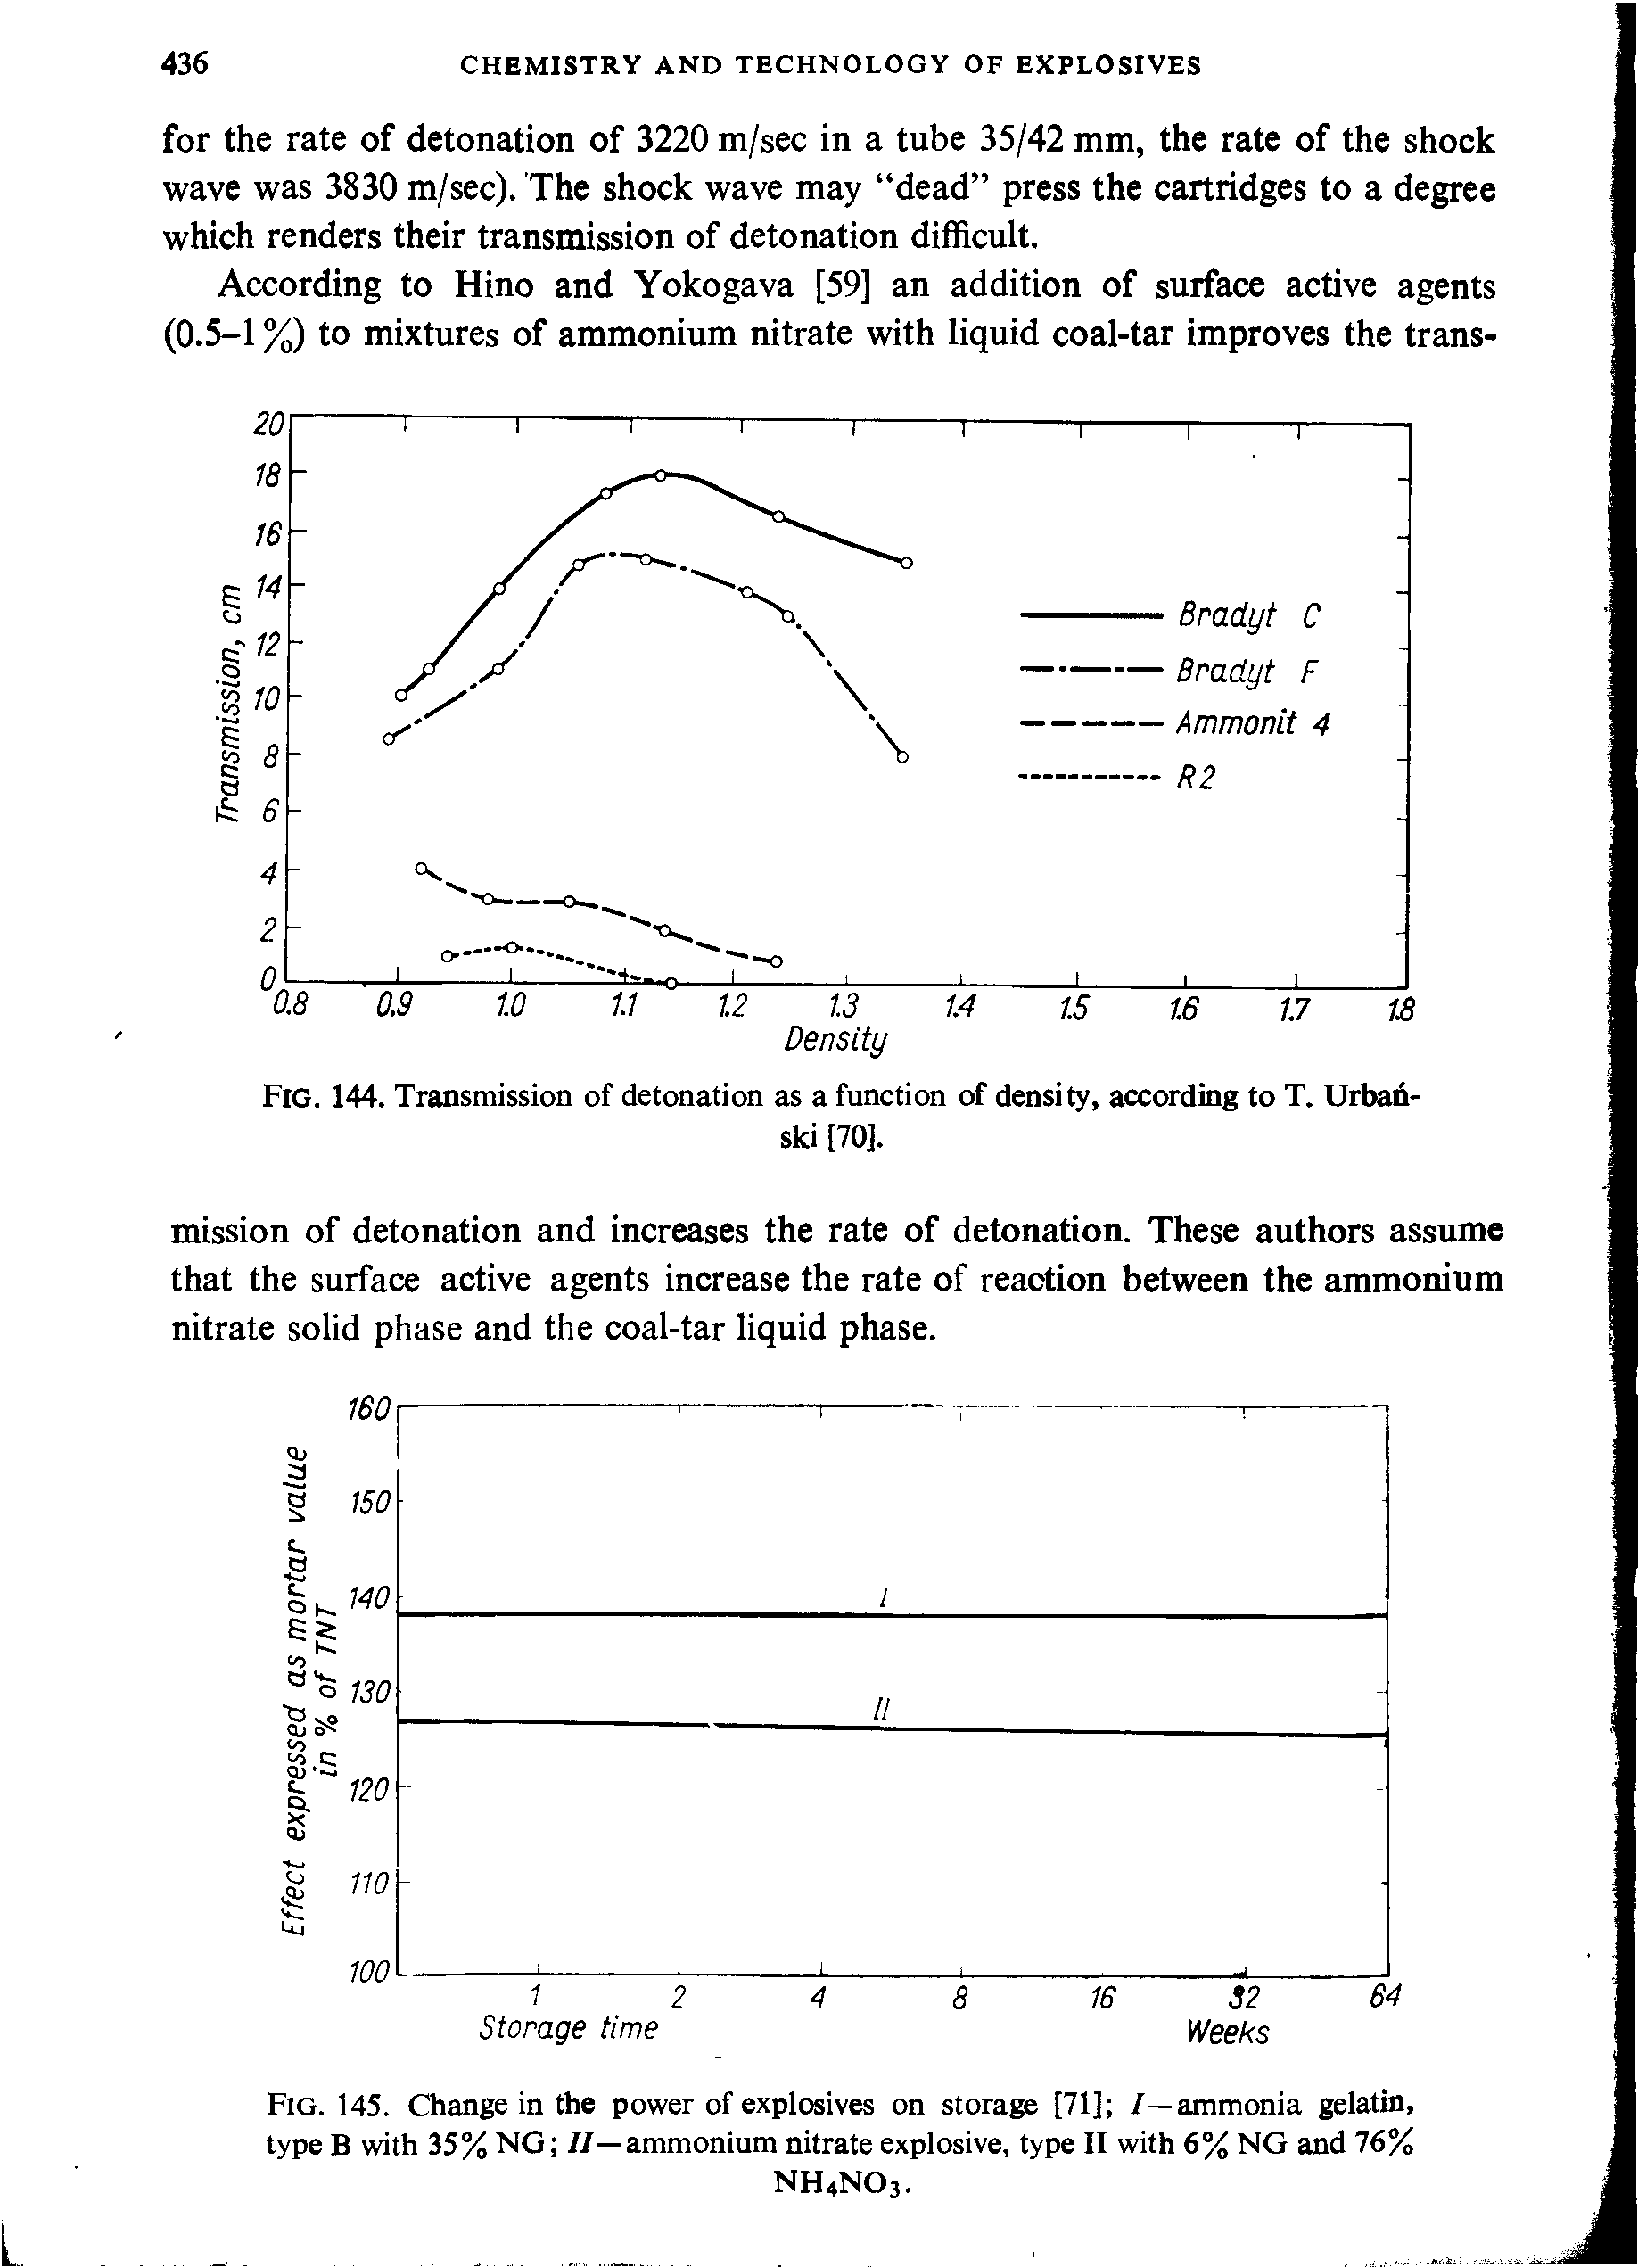 Fig. 145. Change in the power of explosives on storage [71] /—ammonia gelatin, type B with 35% NG //—ammonium nitrate explosive, type II with 6% NG and 76%...